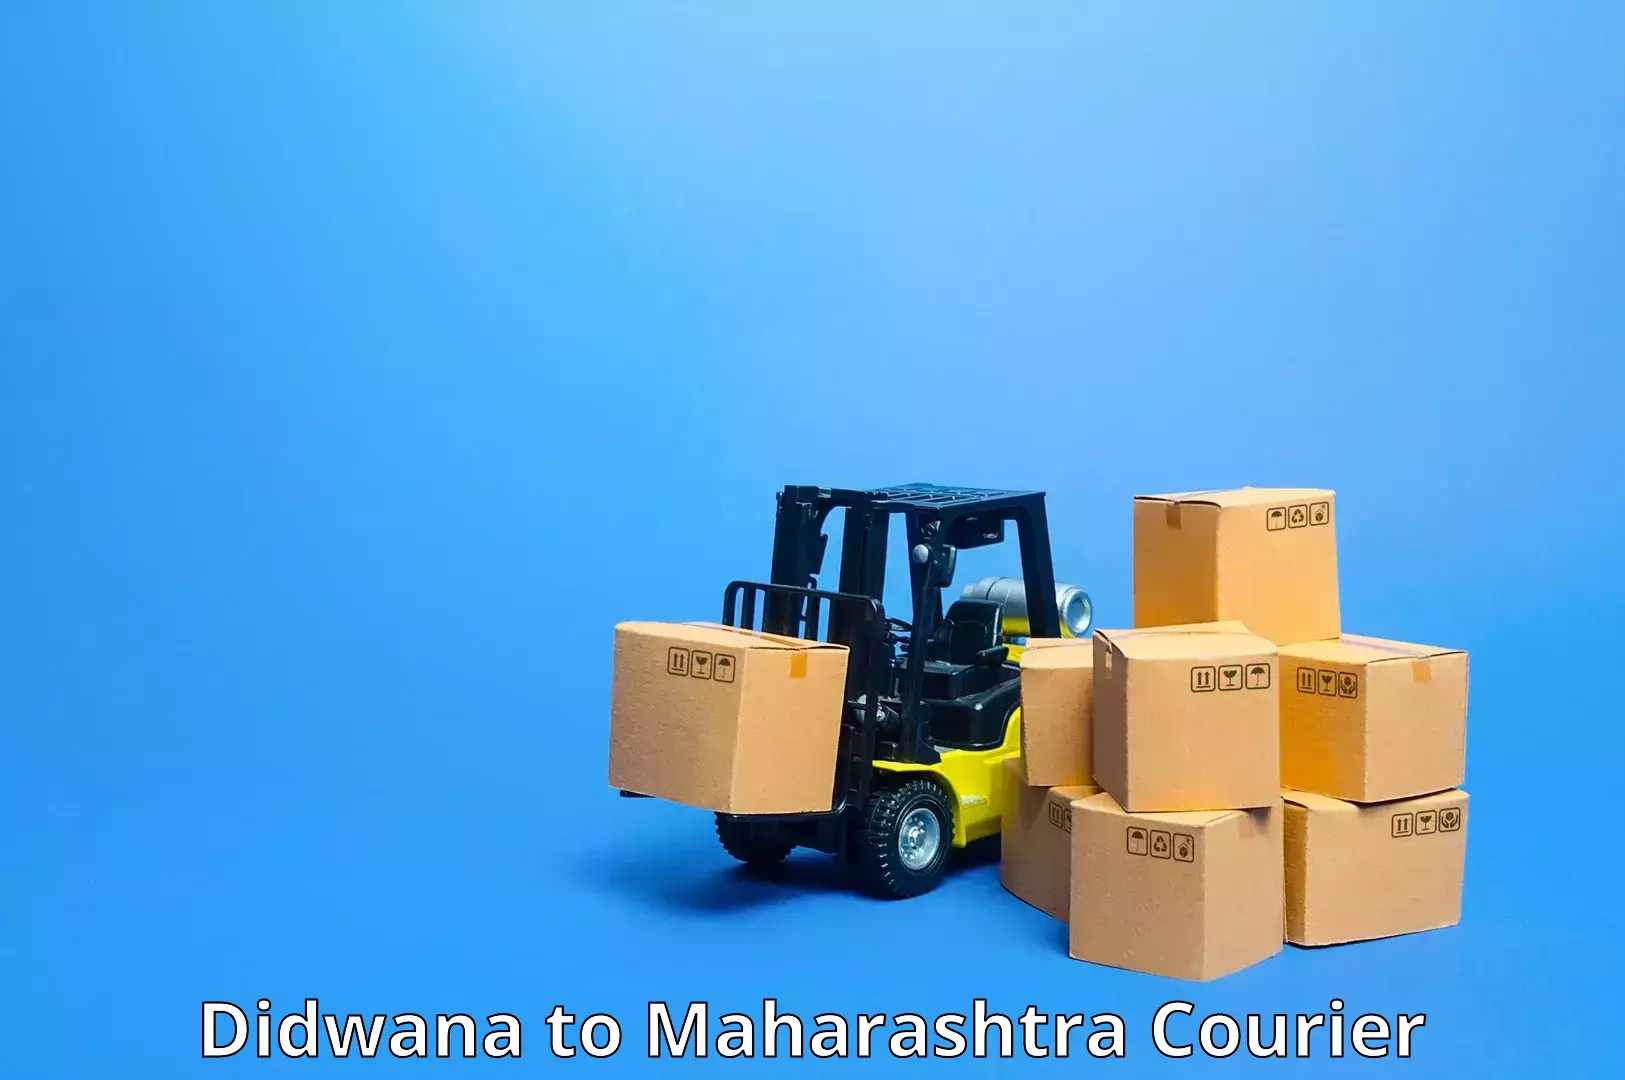 State-of-the-art courier technology in Didwana to Ghatanji